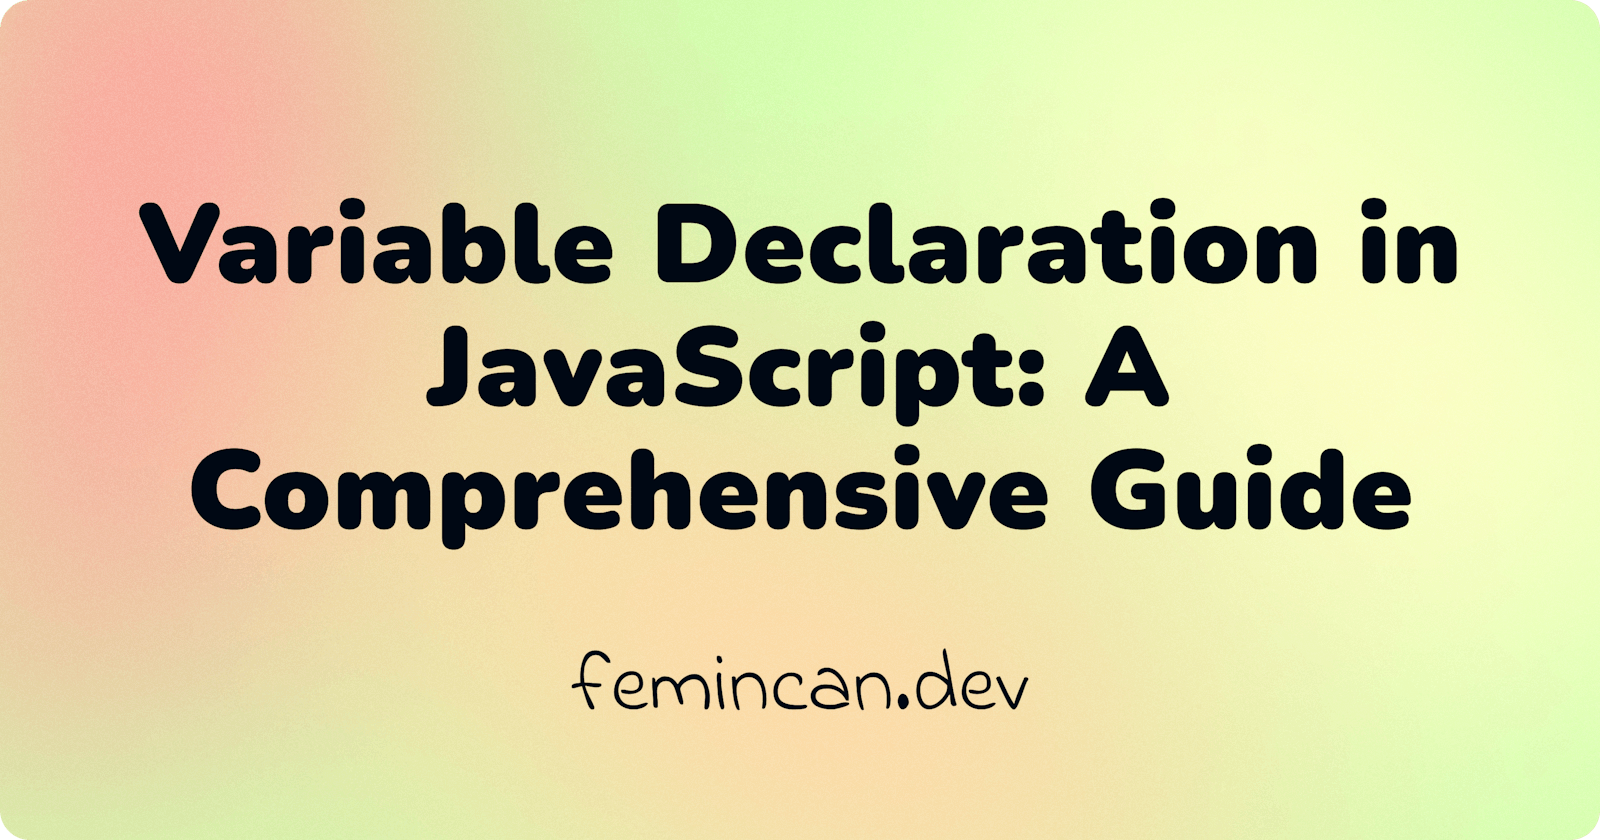 Variable Declaration in JavaScript: A Comprehensive Guide